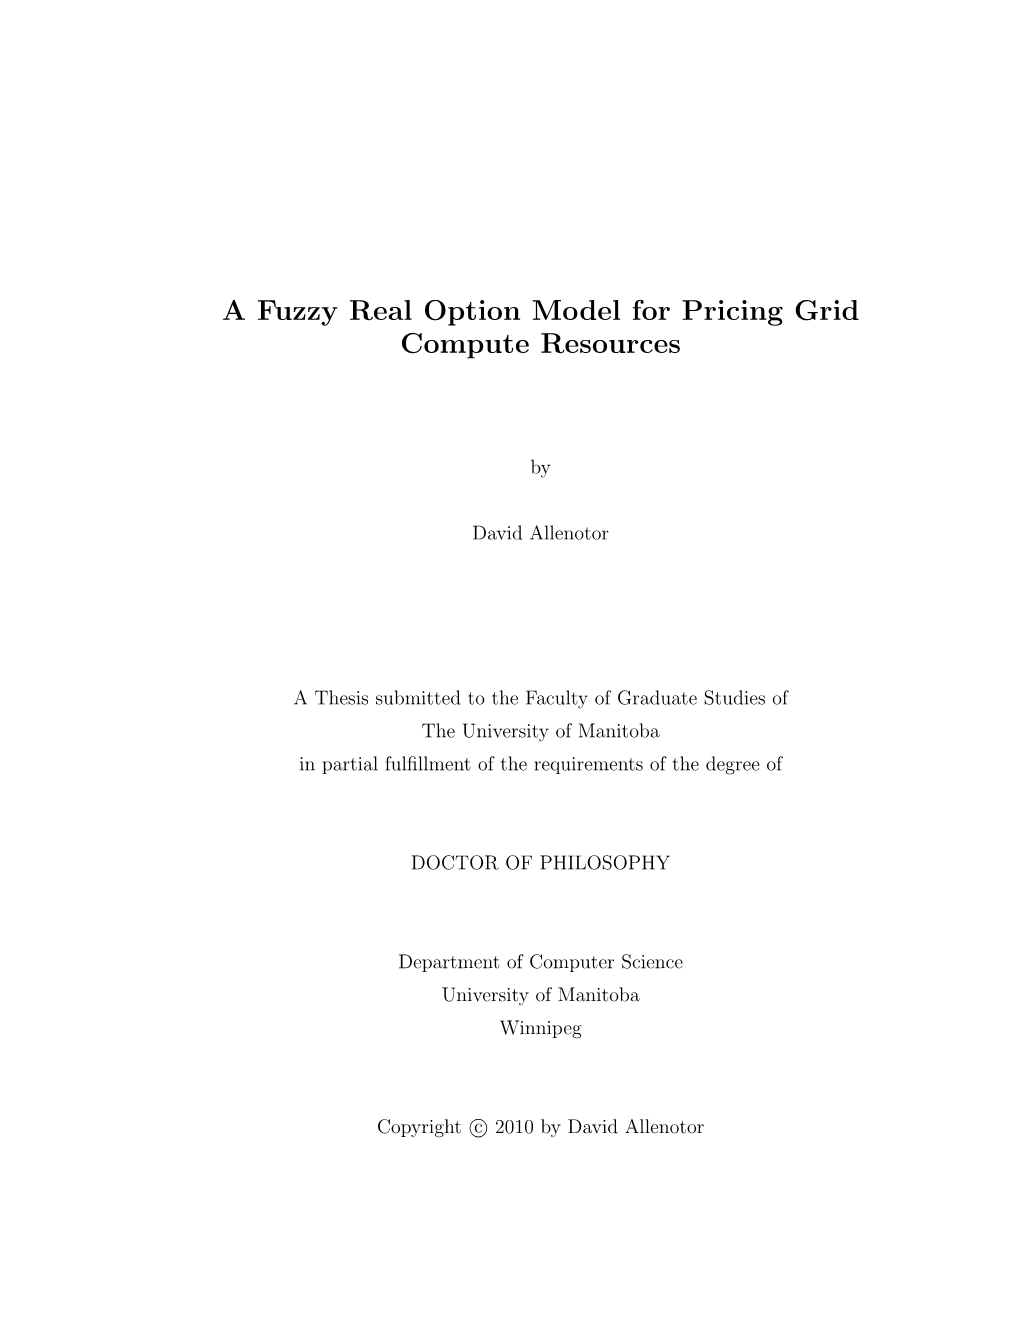 A Fuzzy Real Option Model for Pricing Grid Compute Resources